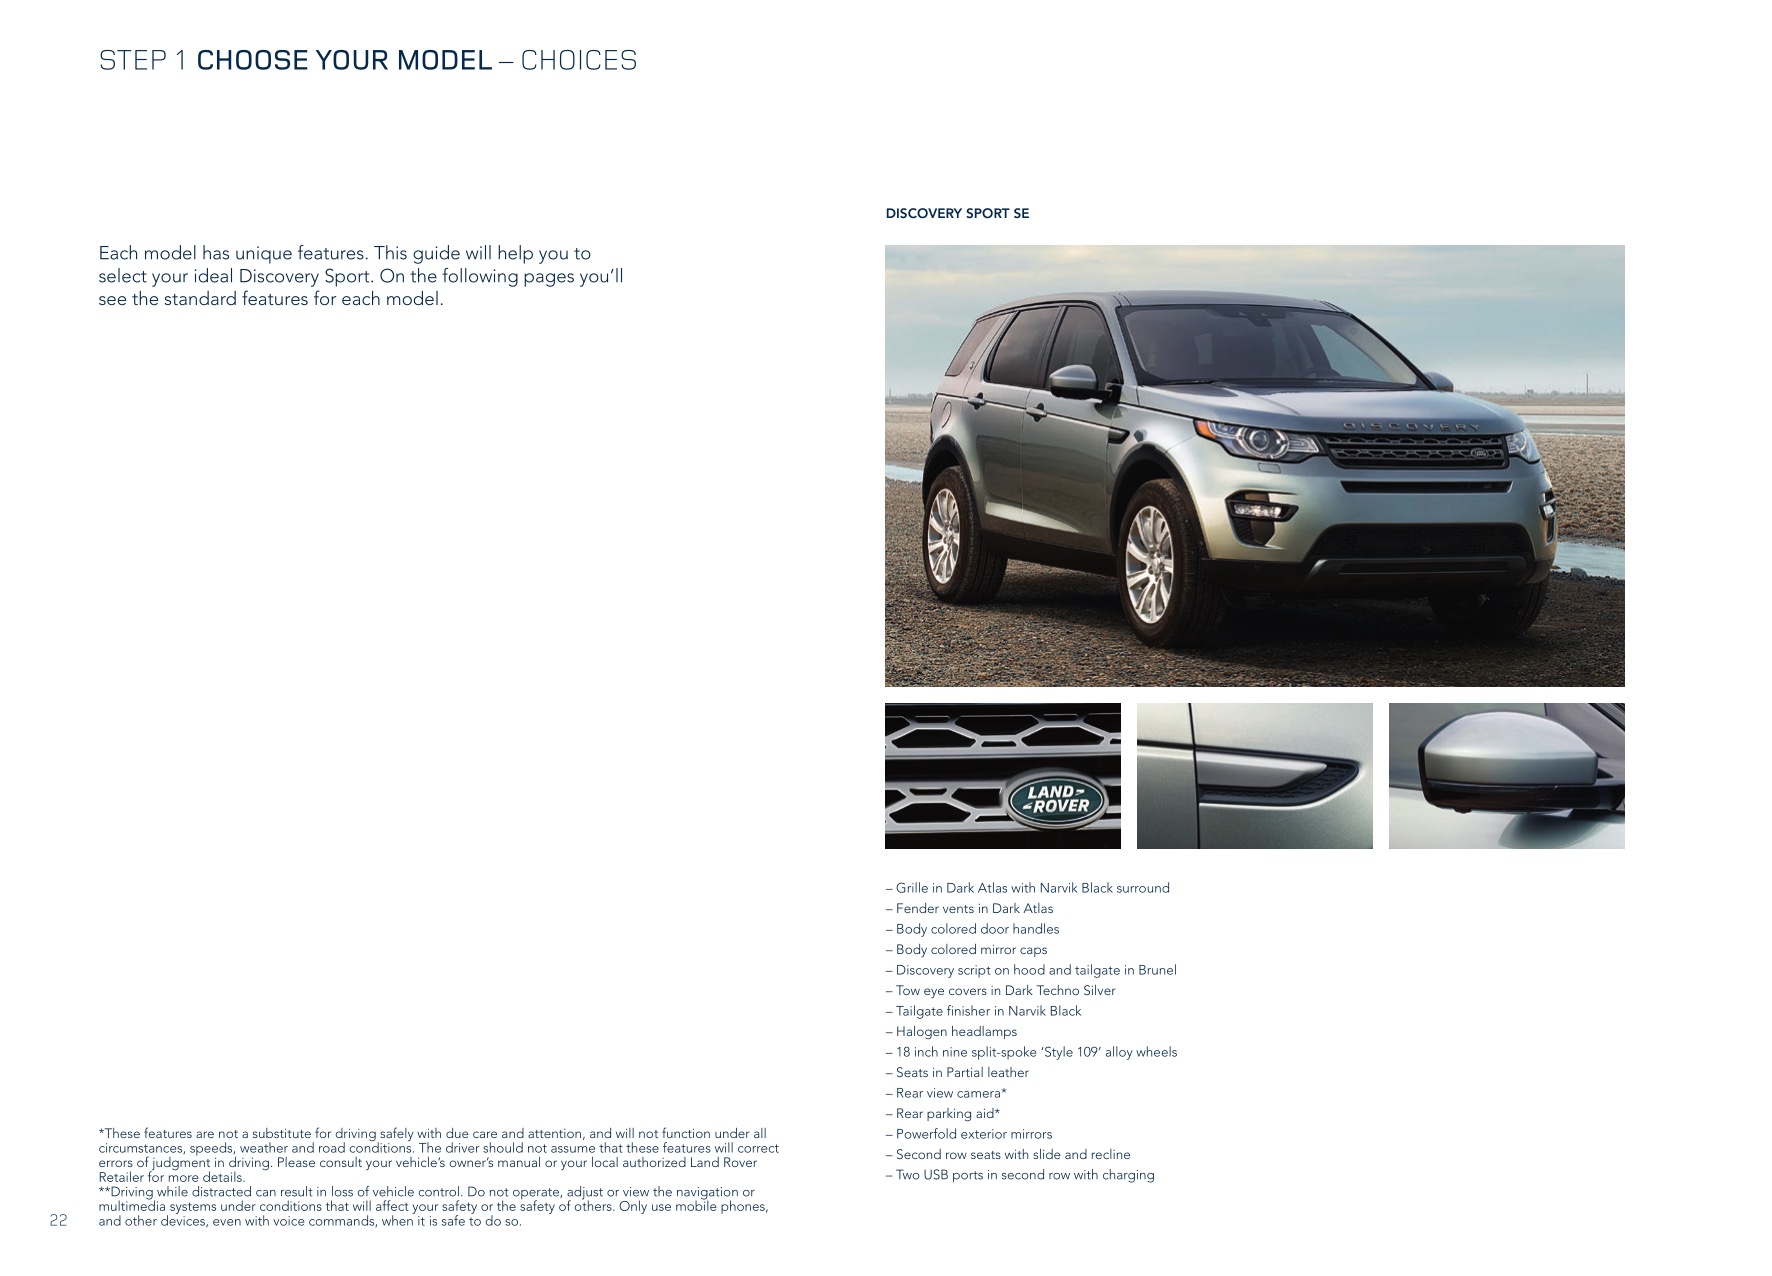 2015 Land Rover Discovery Sport Brochure Page 29